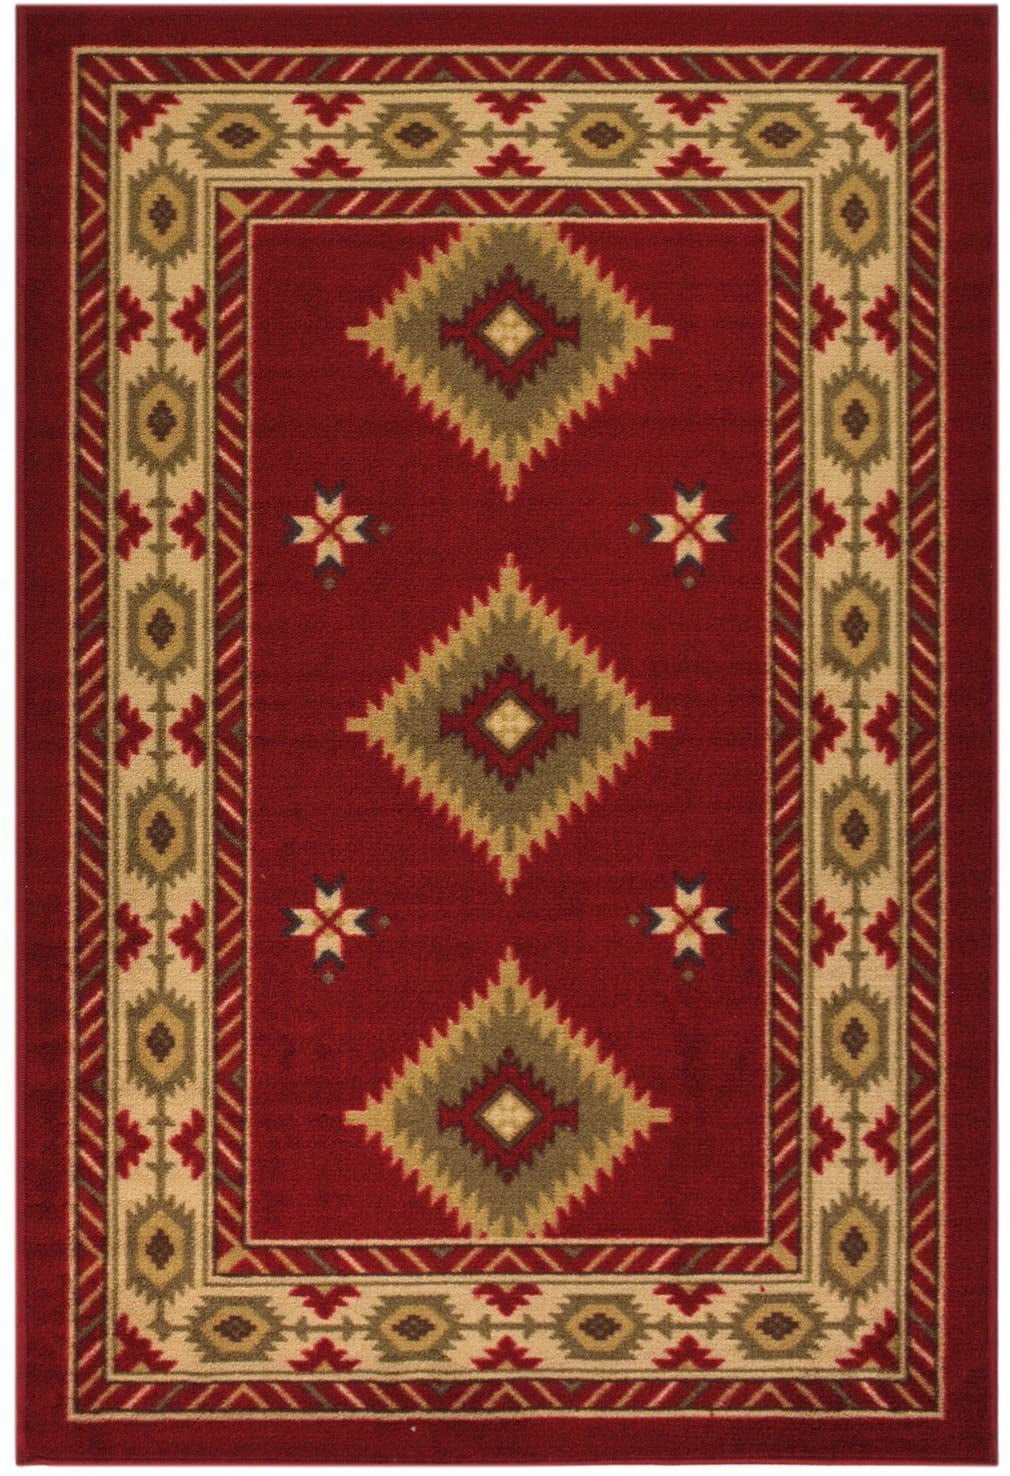 23 x 7' Teal Blue, 23 x 7 Southwestern Runner and Area Rug Dark Red Printed Slip Skid Resistant Rubber Back 3 Color Options Rug Styles RUB1096-2X7